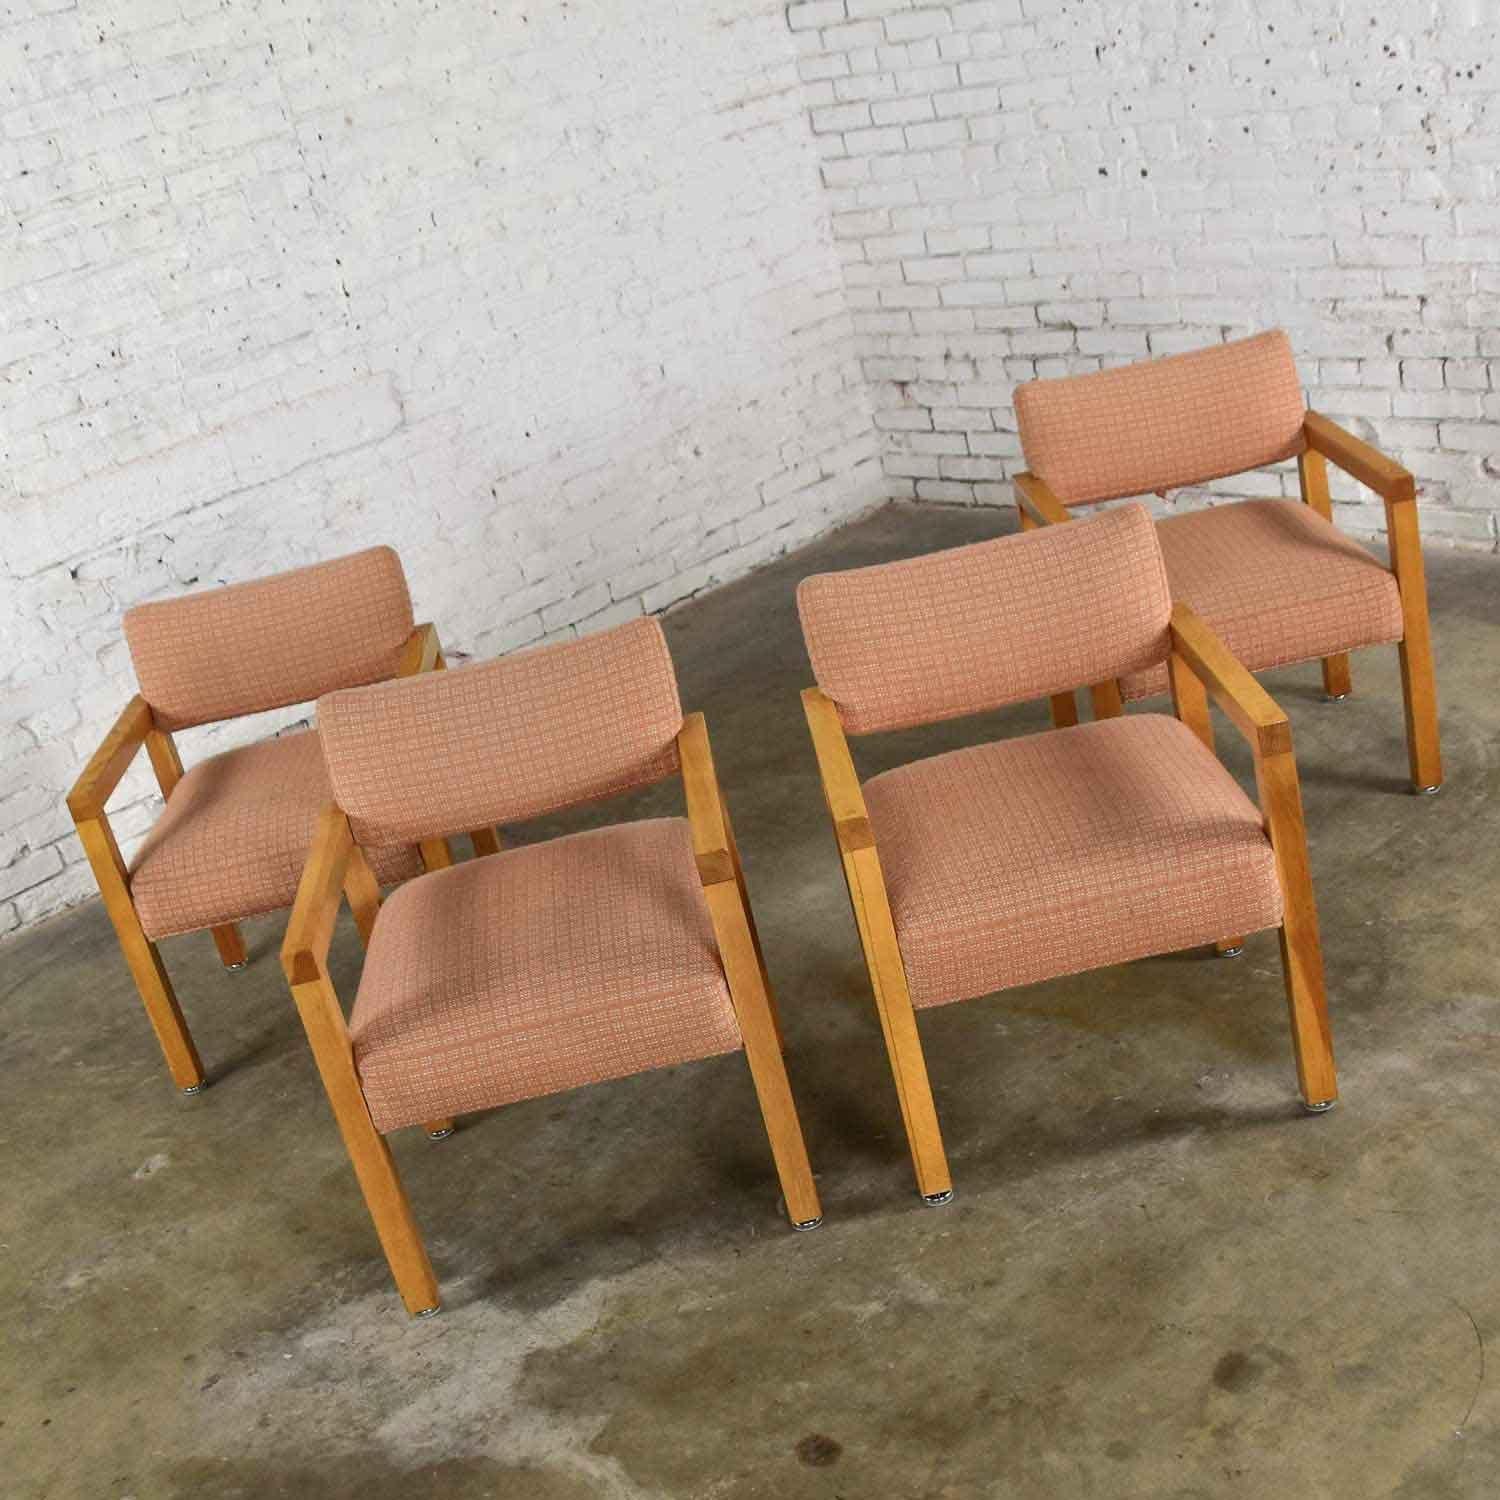 Modern Square Frame Oak Armchairs with Original Blush Textured Fabric, Set of 4 For Sale 5